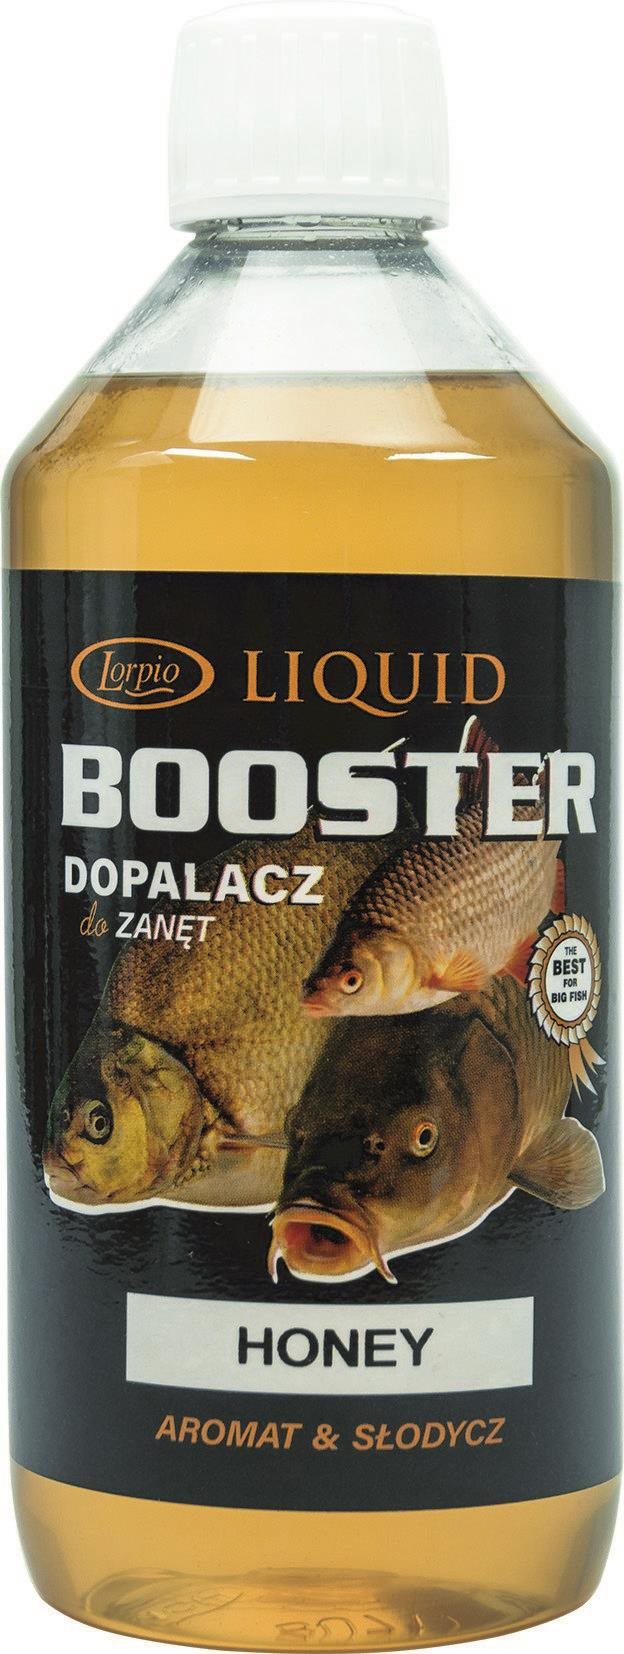 Booster Lorpio Booster Med 500ml